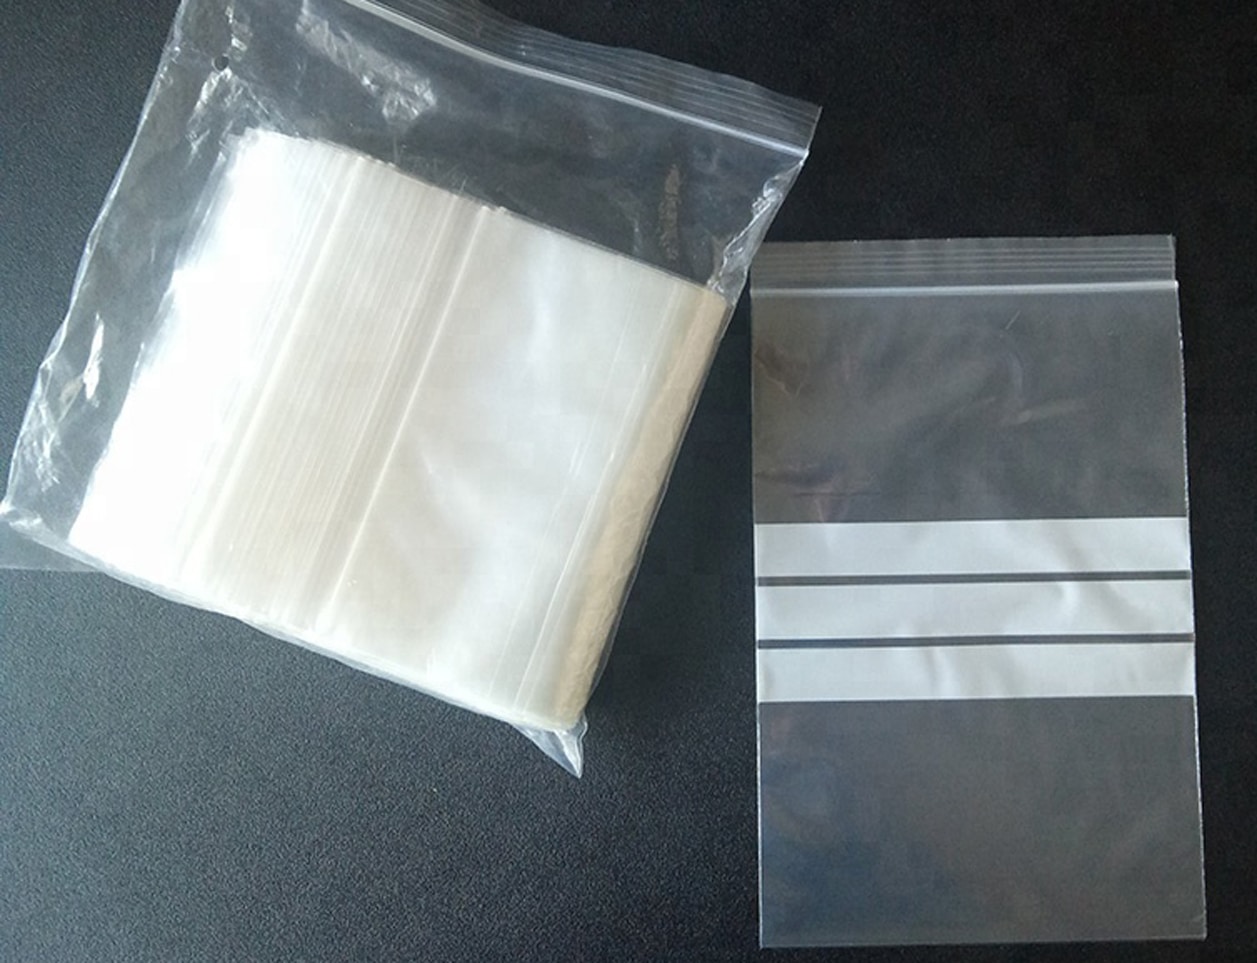 Grip Seal bags Resealable Clear Polythene Plastic SIZES IN INCHES fast despatch 